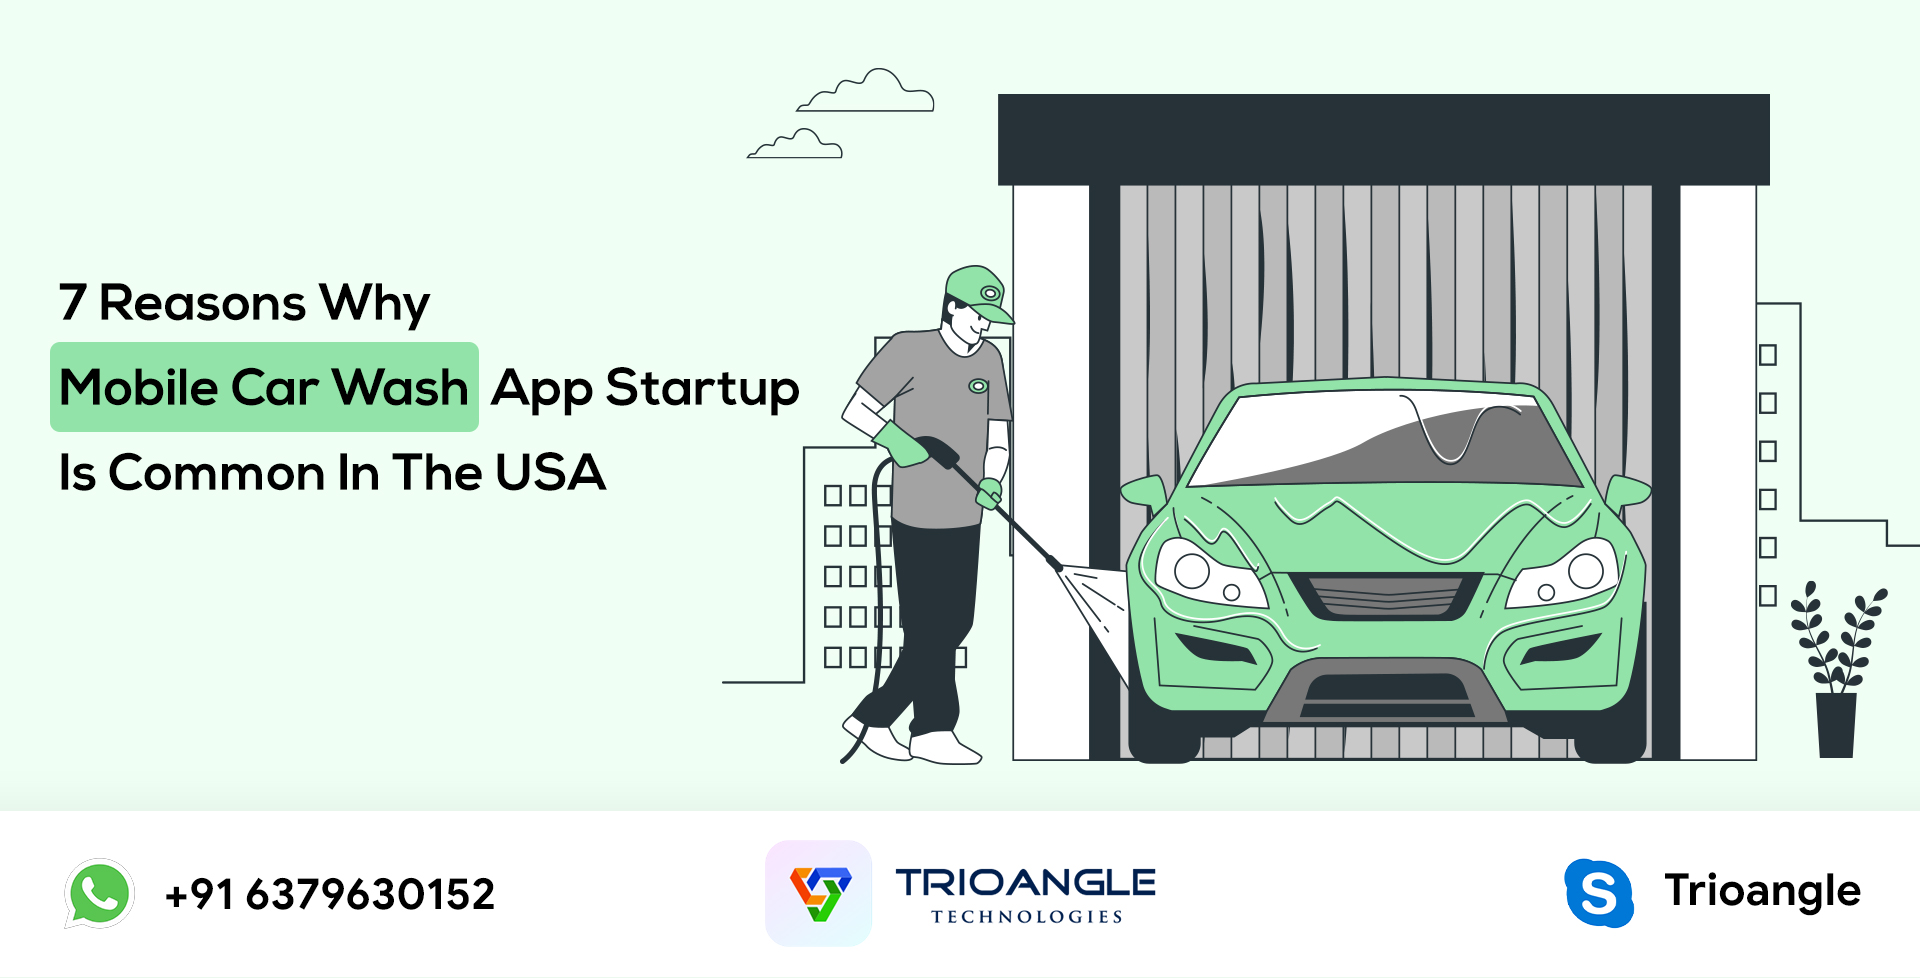 7 Reasons Why Mobile Car Wash App Startup Is Common In The USA